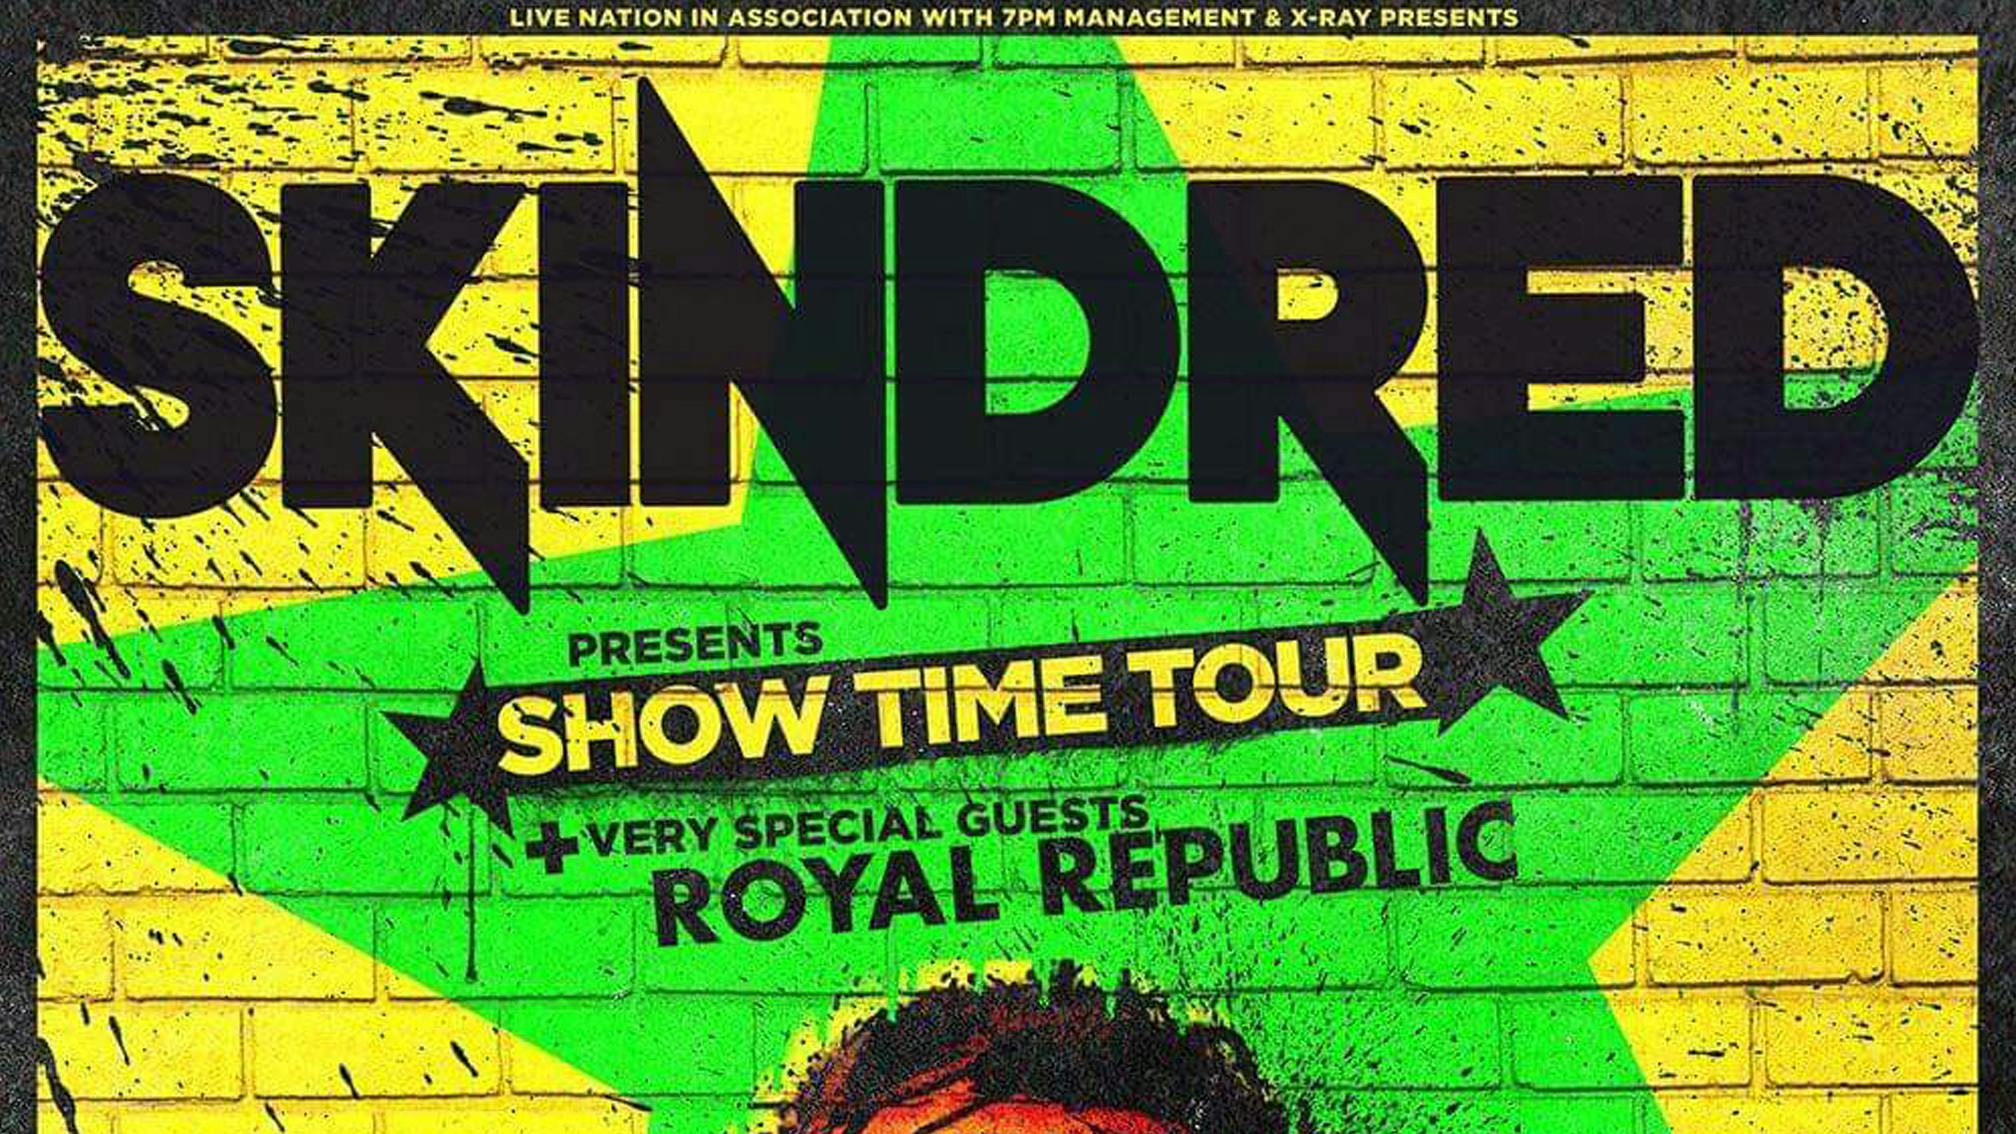 Skindred Announce 2021 Showtime Tour With Royal Republic